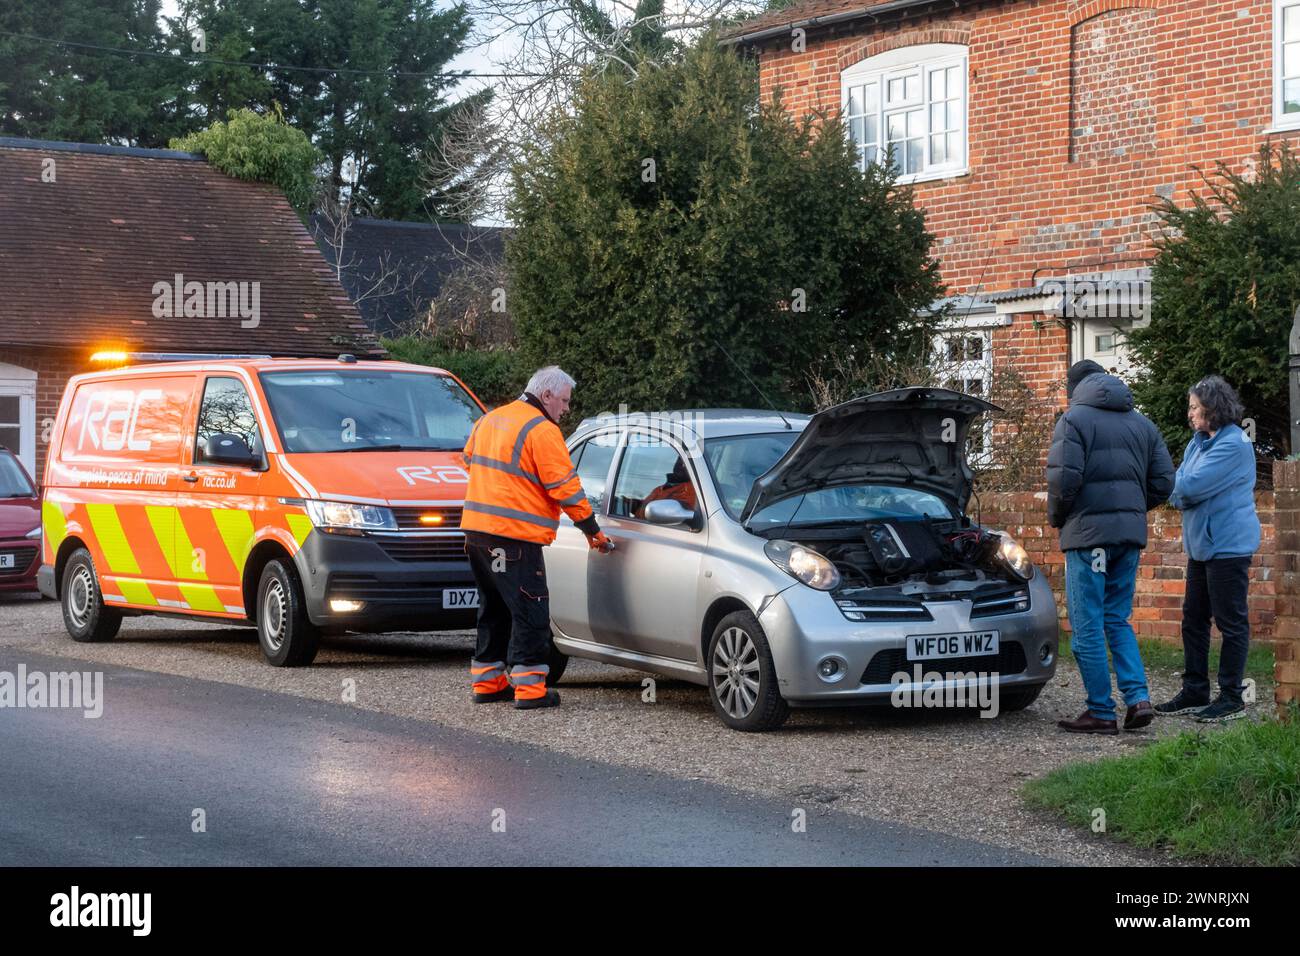 RAC breakdown service man fixing a broken down car with the couple or owners standing watching, England, UK Stock Photo